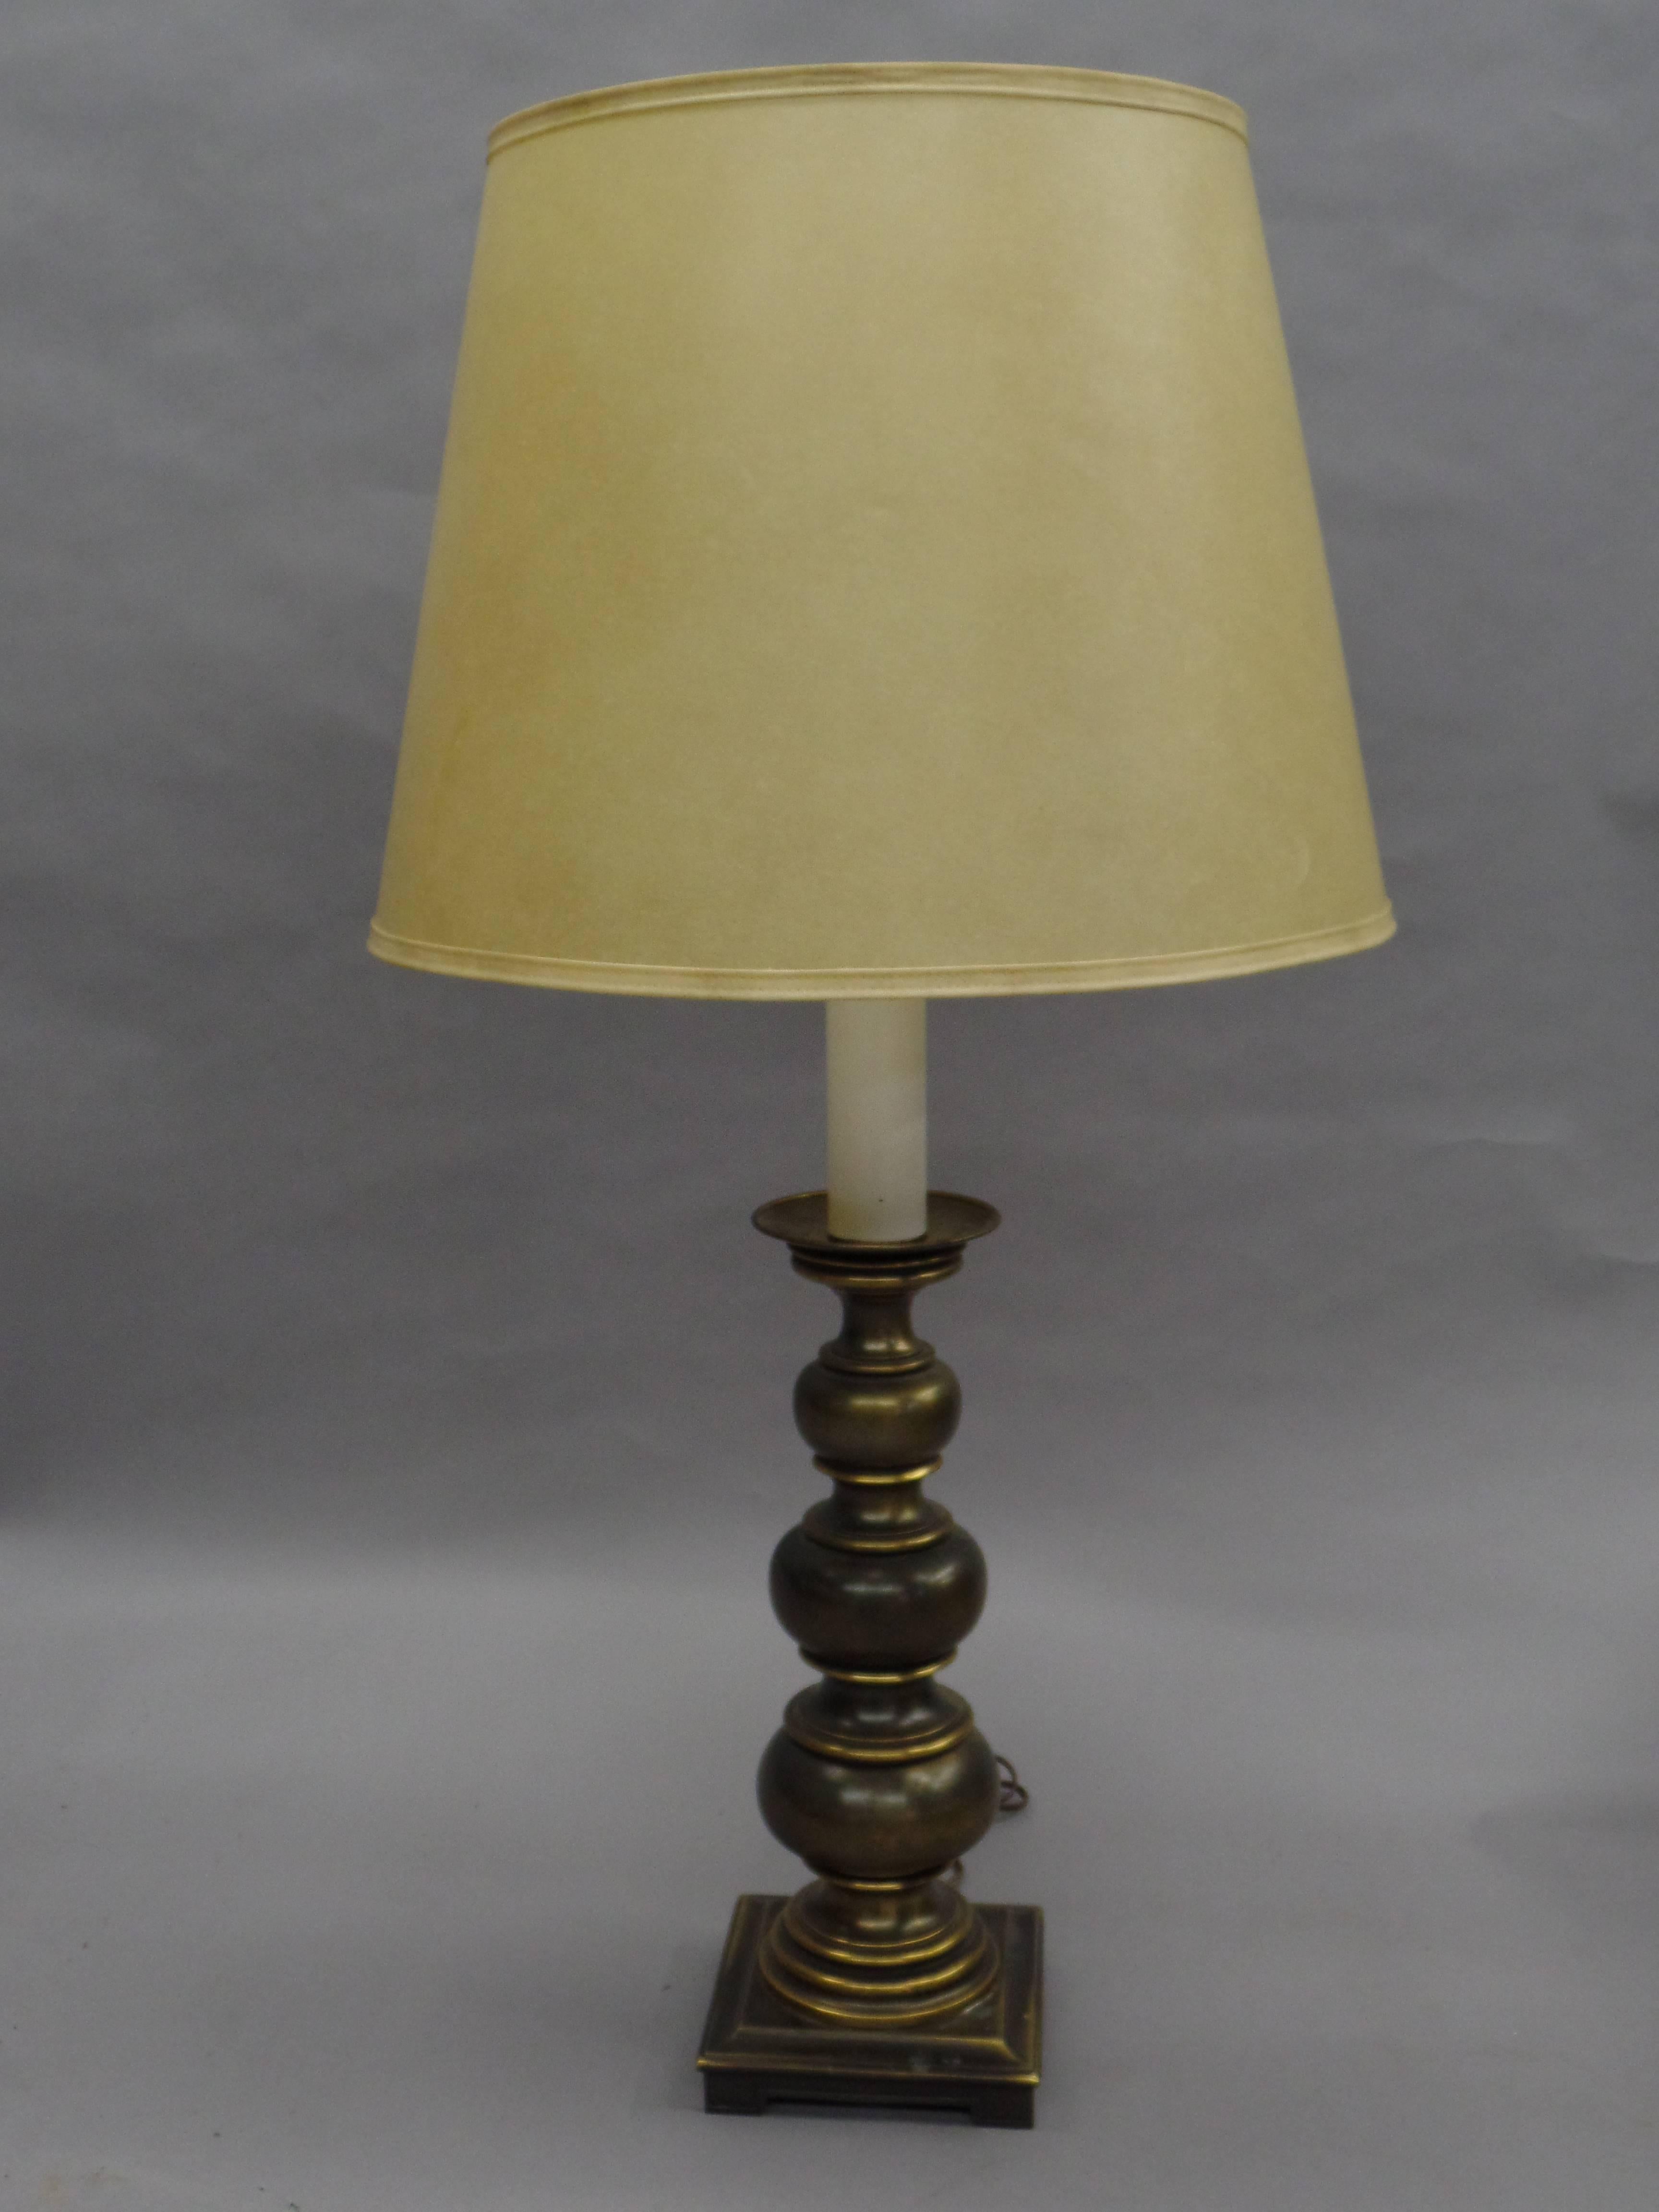 Elegant pair of British Mid-Century brass ball lamps in the modern neoclassical spirit with a graduated series of brass balls resting on a square base.

Total height as shown is 39" and the height of the brass balls alone is 18.75".